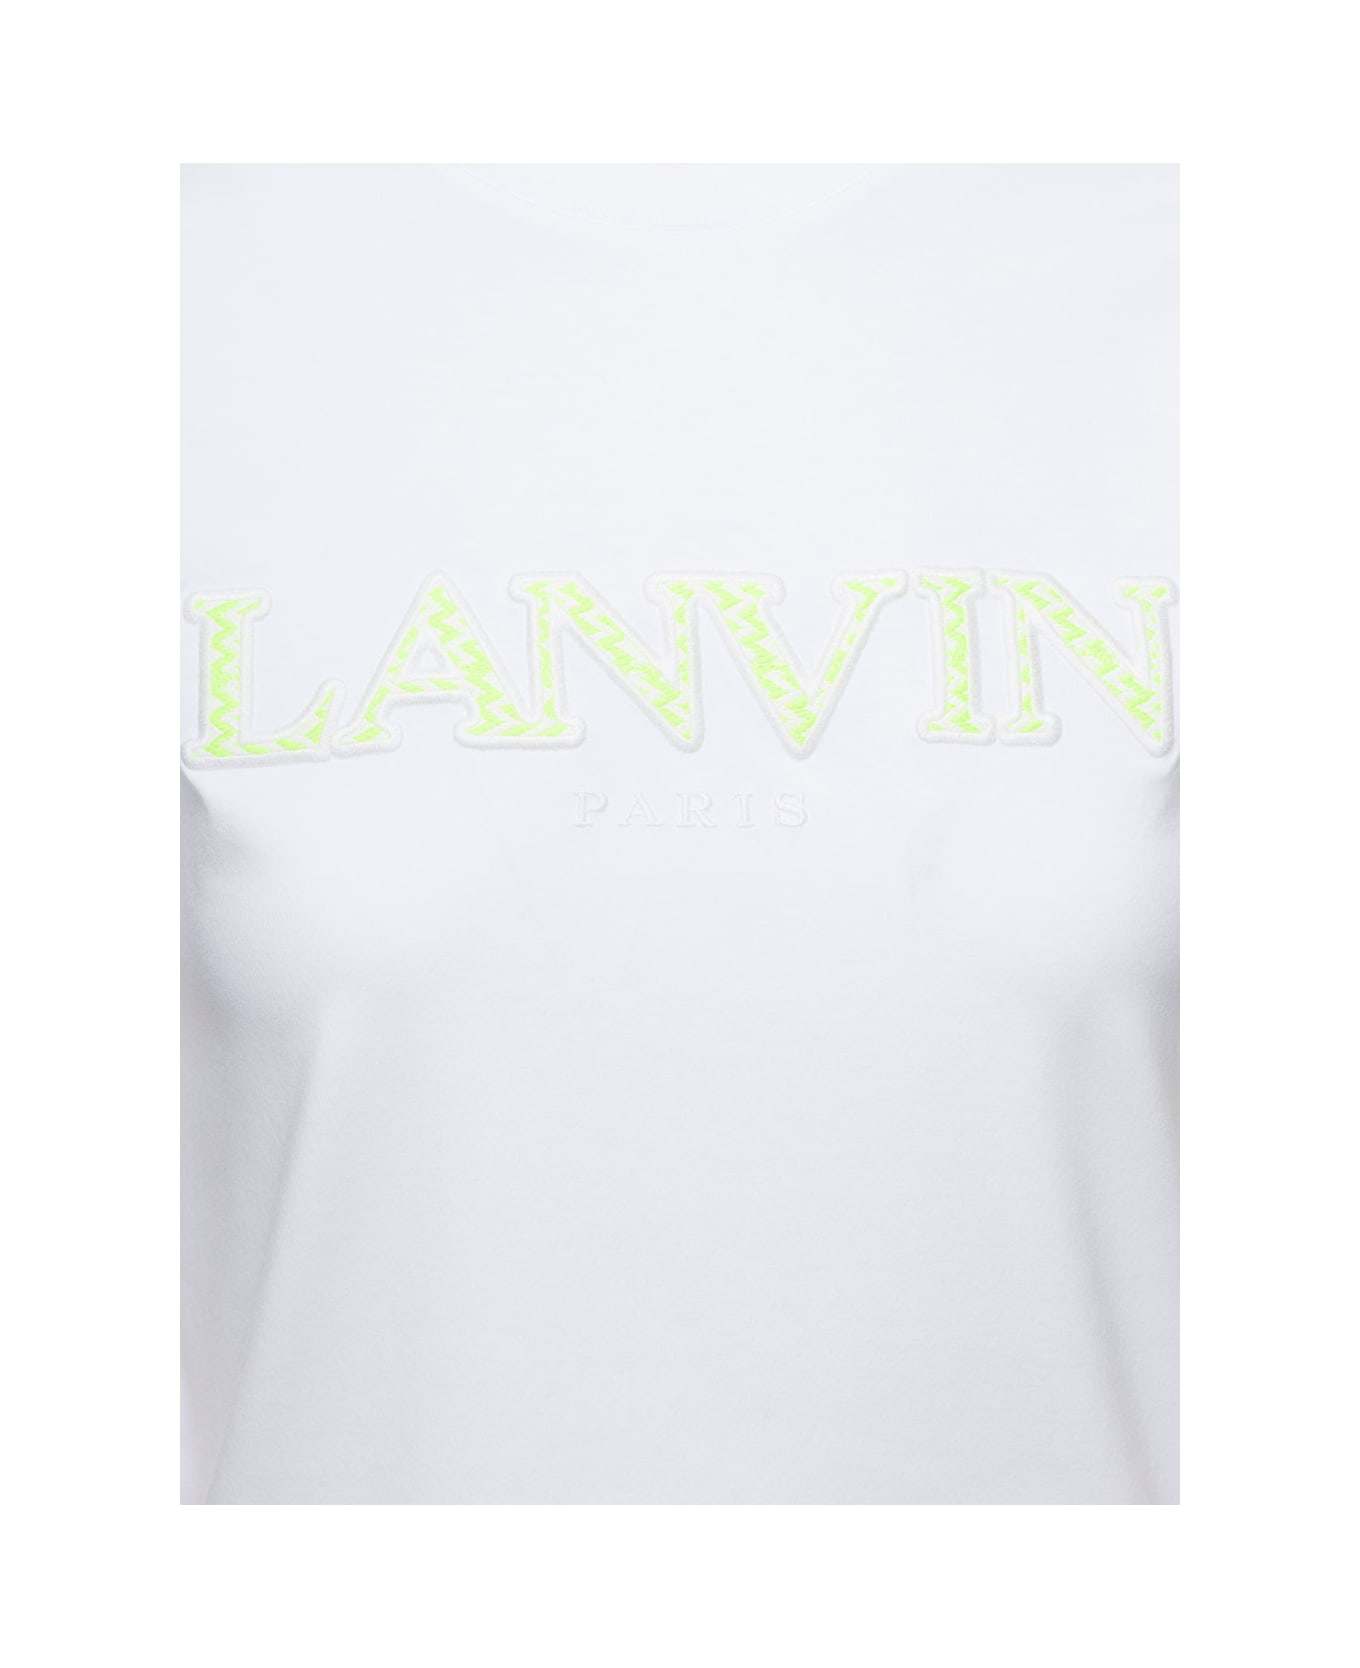 Lanvin White Classic Fit T-shirt With Printed Logo In Cotton Woman - White Tシャツ